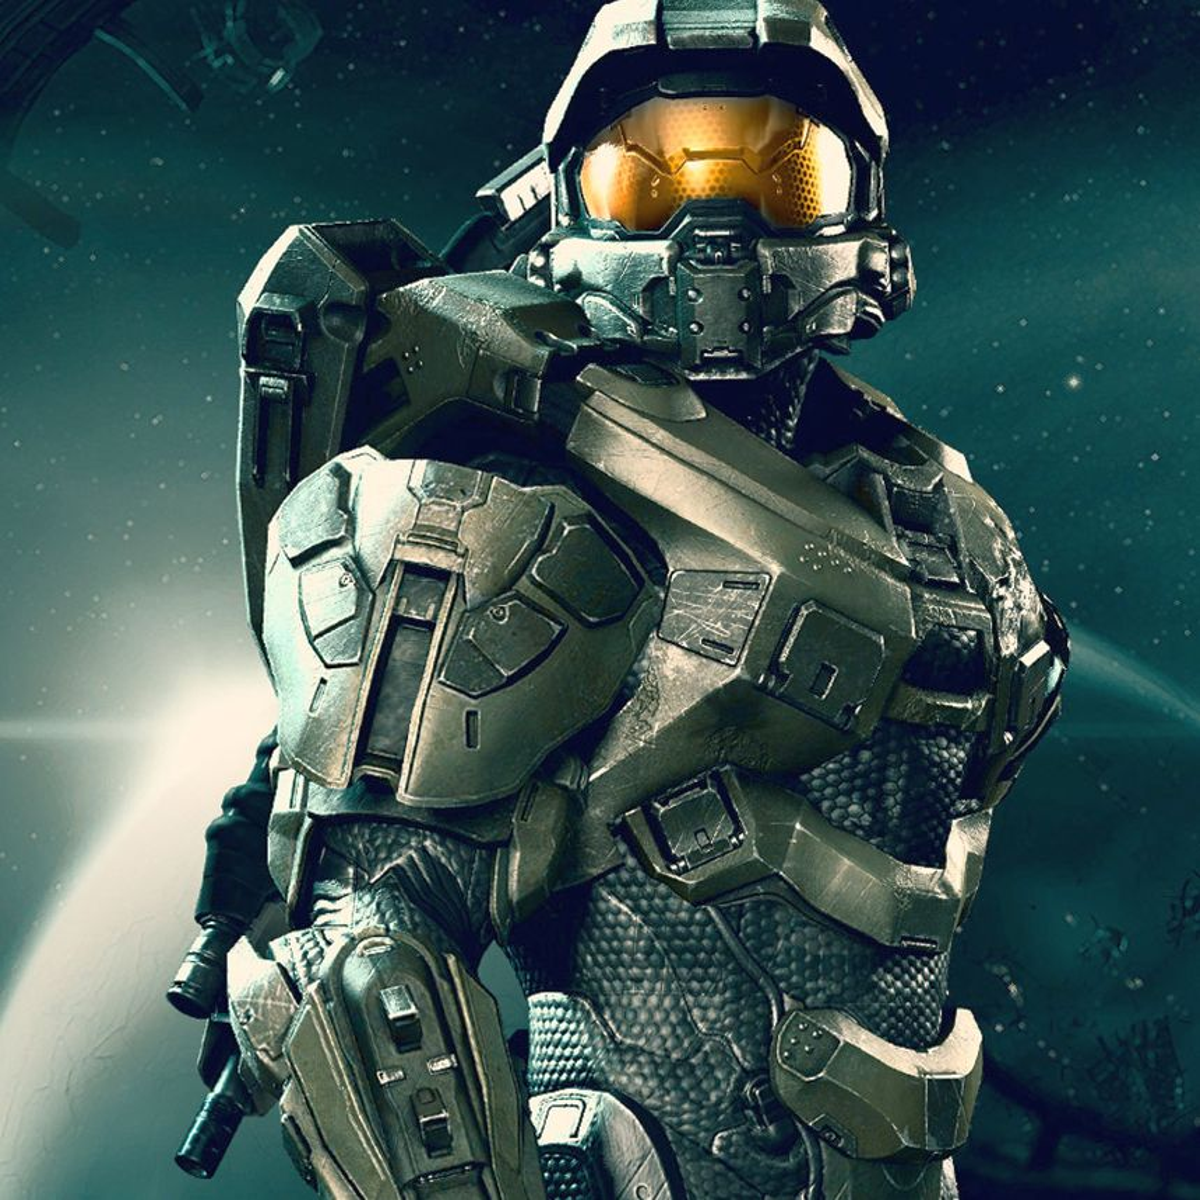 The Halo TV series will now debut on Paramount+ in early 2022